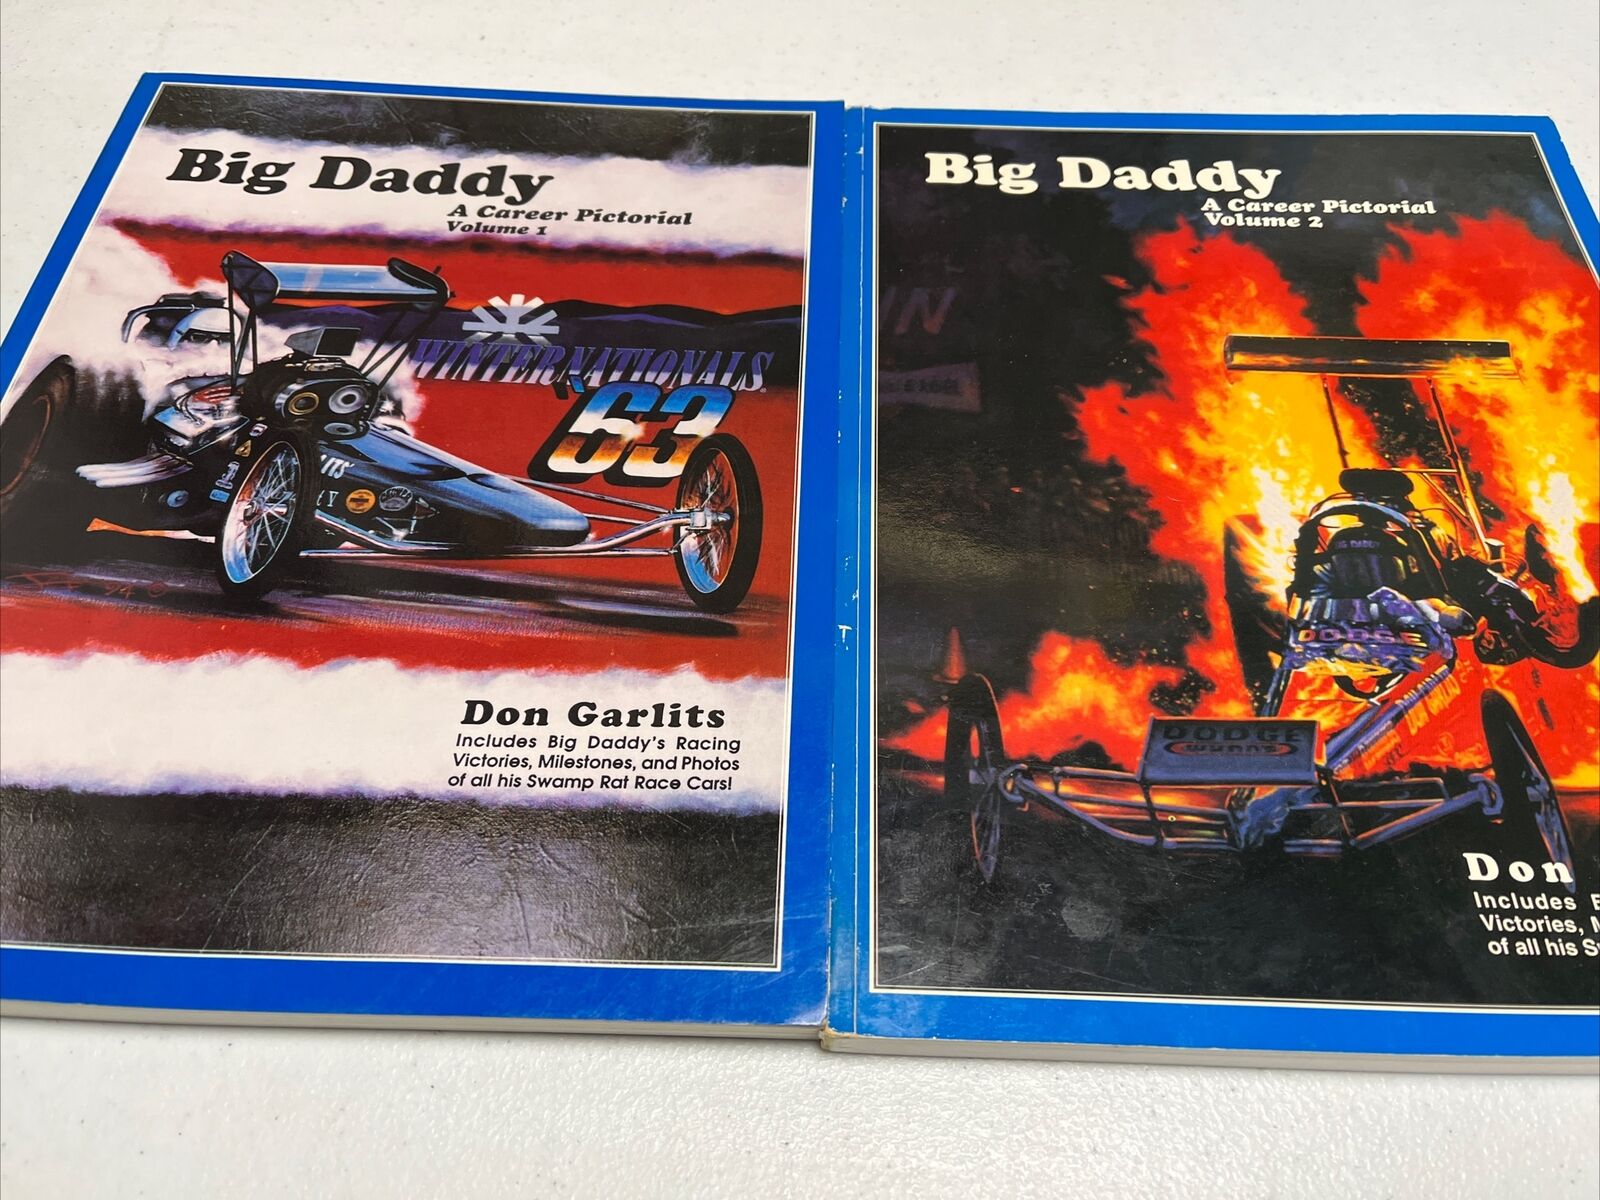 Don Garlits - Big Daddy Volumes 1 & 2 - Both Signed by Michael Mikulice